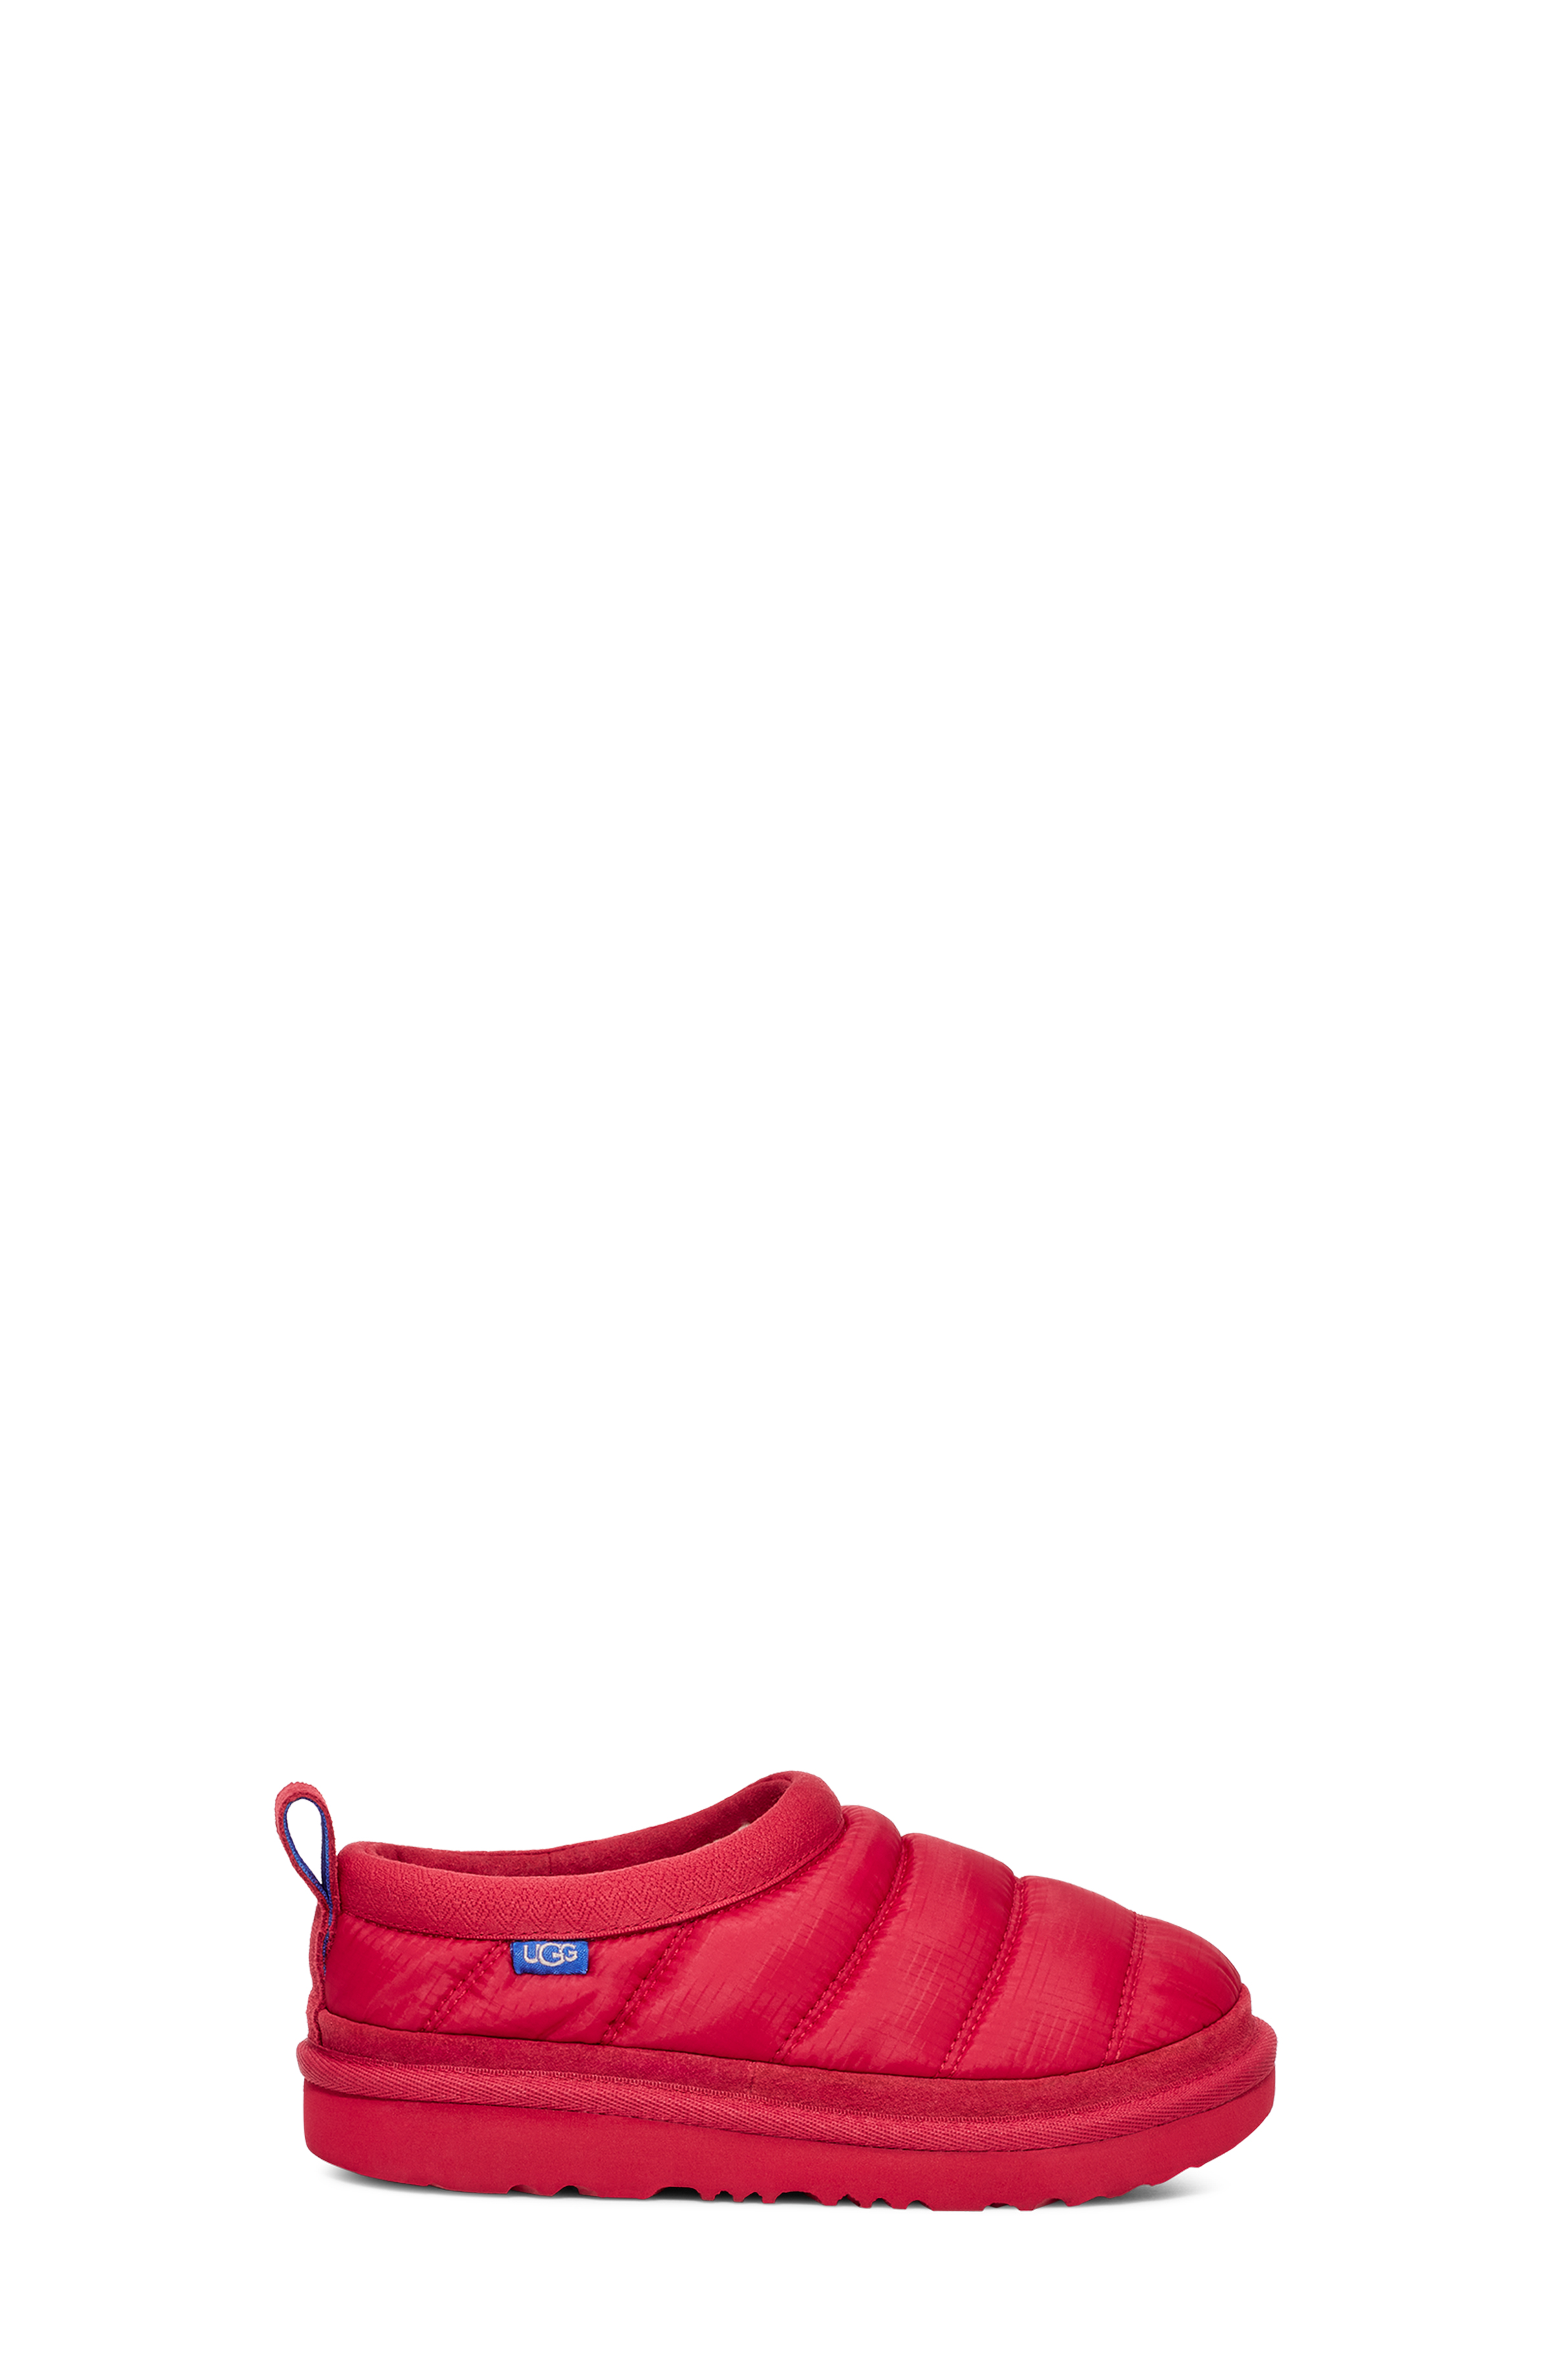 UGG Chausson Tasman LTA pour Grand Enfant in Red, Taille 31, Suède product